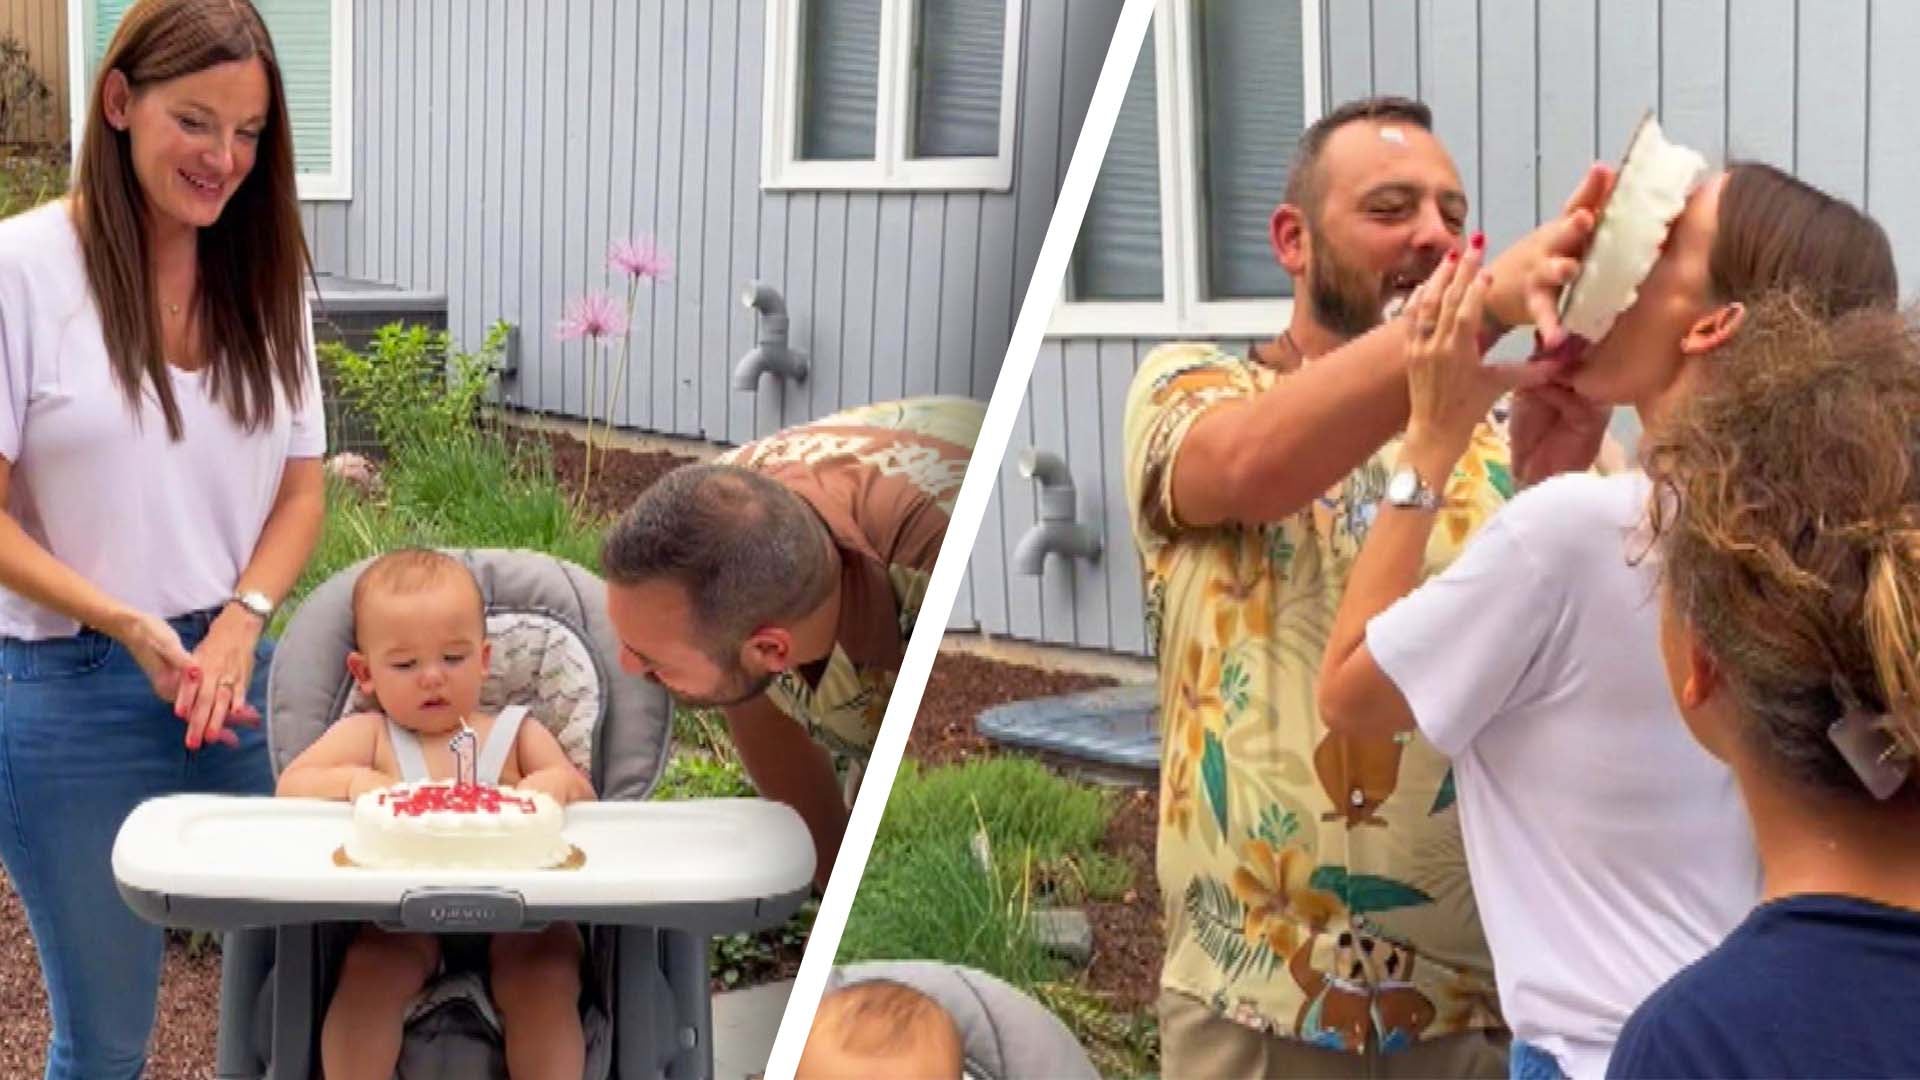 Adorable baby sees birthday cake, dives in headfirst